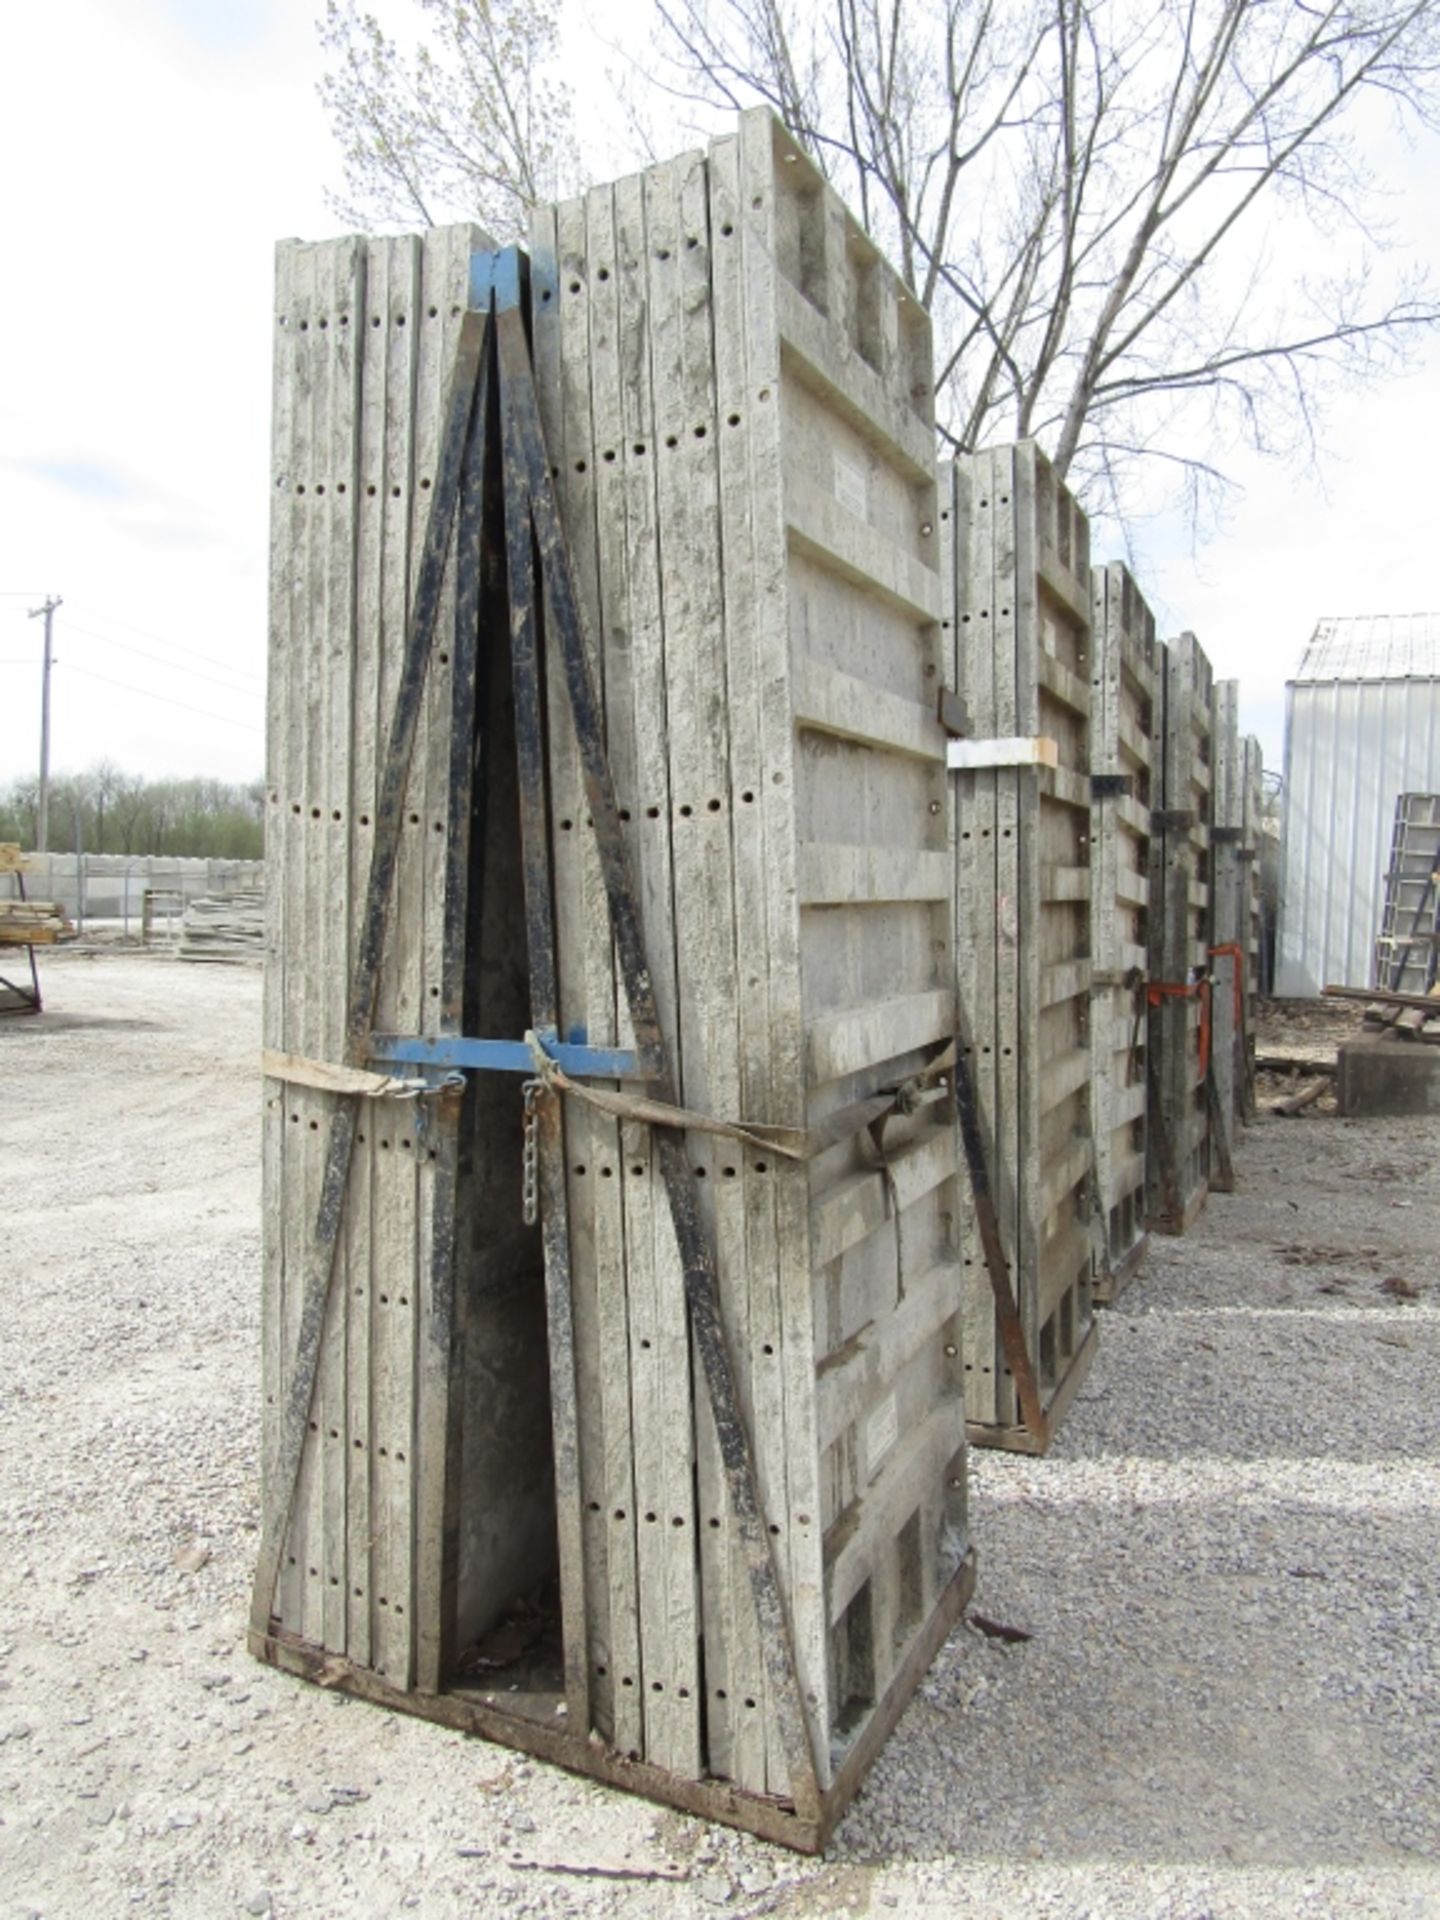 (16) 36"x 9' Durand, Western Precise Concrete Form, Smooth 6-12 Hole Pattern, Located in Wildwood,